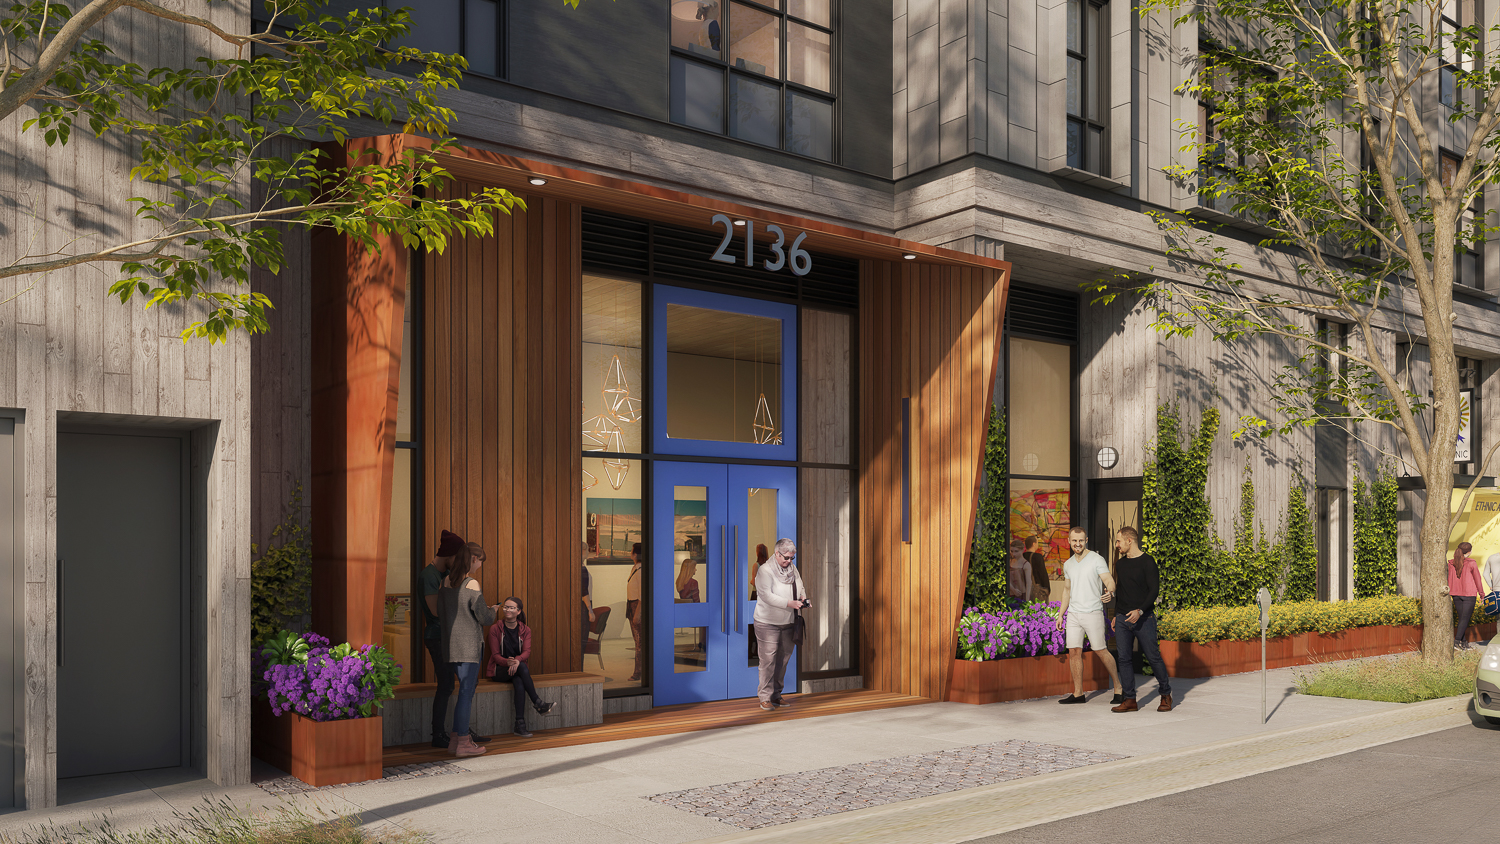 2136 San Pablo Avenue lobby entry, rendering by Trachtenberg Architects